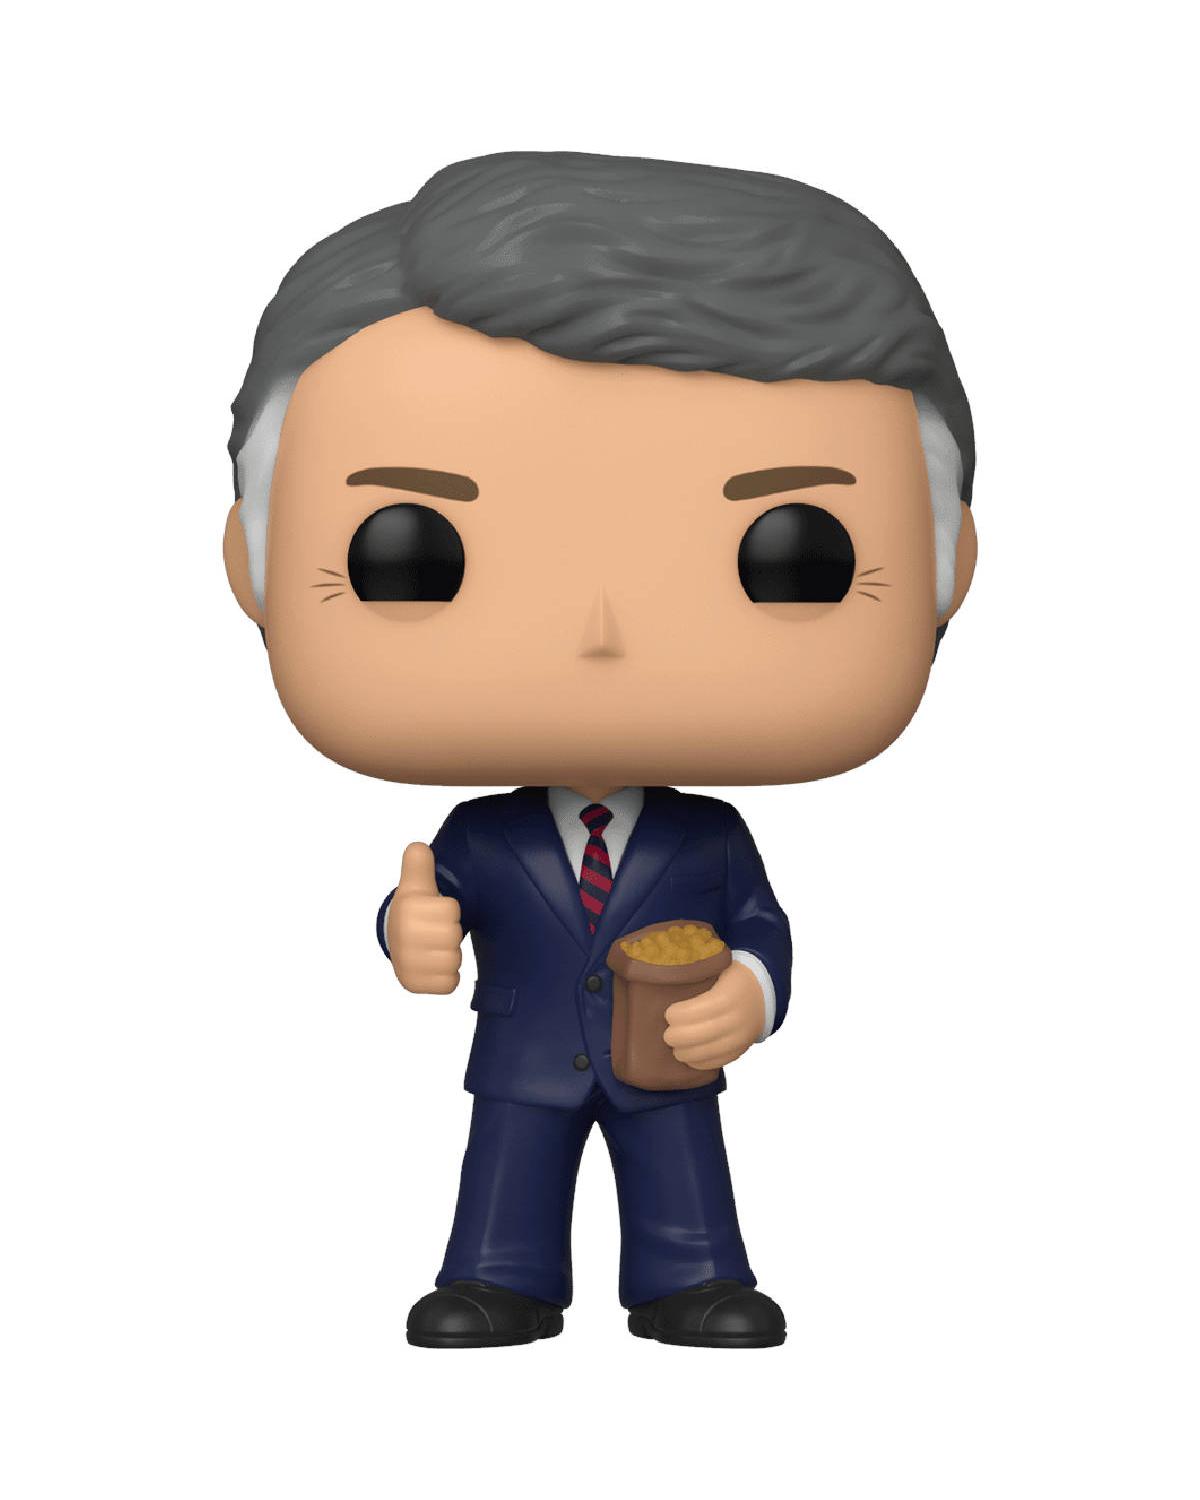 POP! ICONS AMERICAN HISTORY - JIMMY CARTER #48